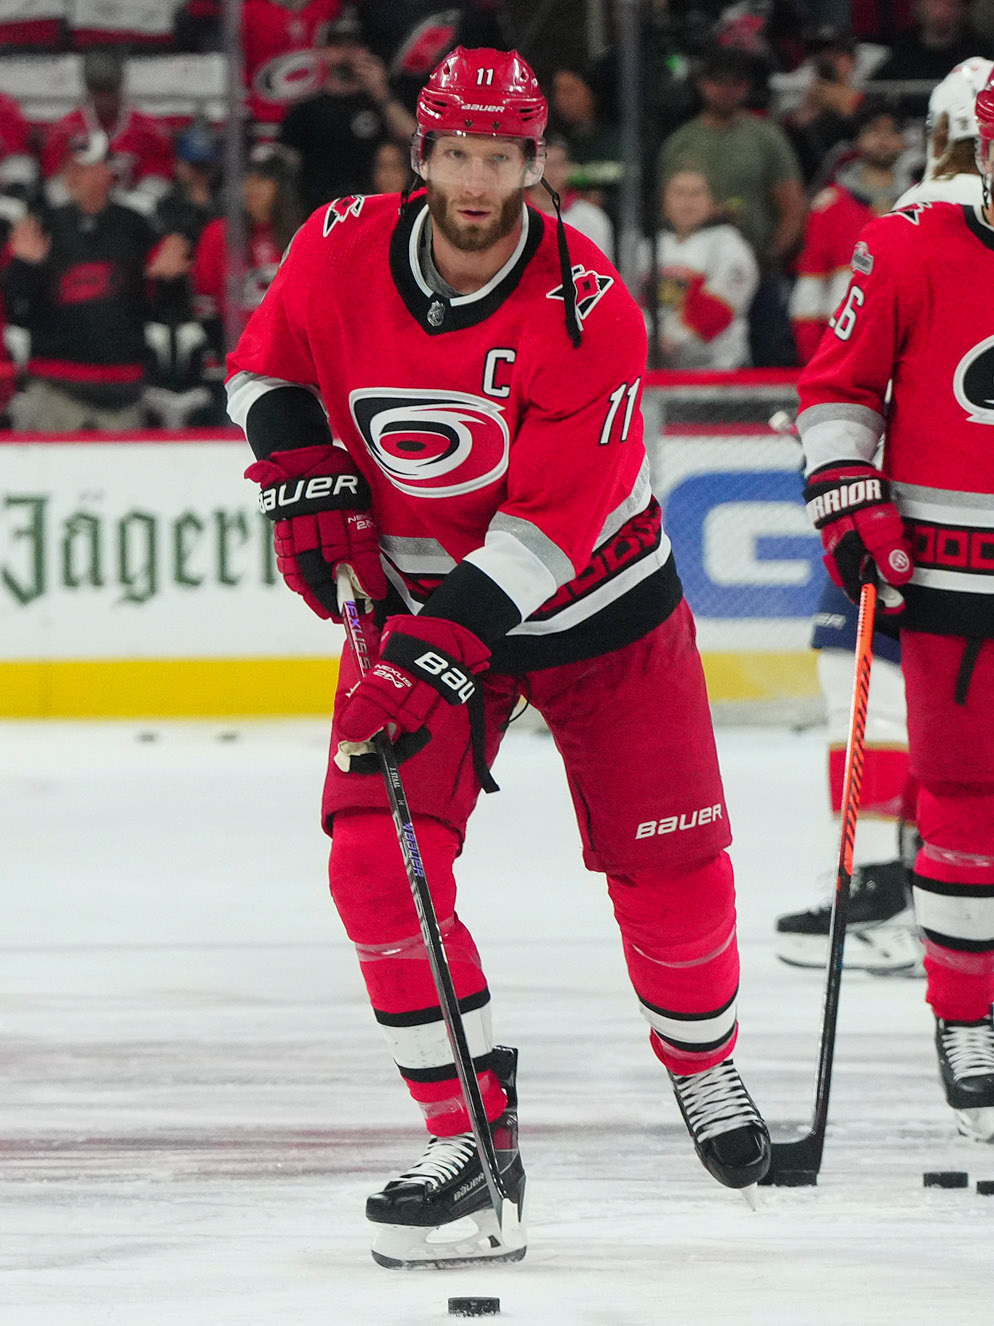 Carolina Hurricanes hit it out of the park in more ways than one on Friday